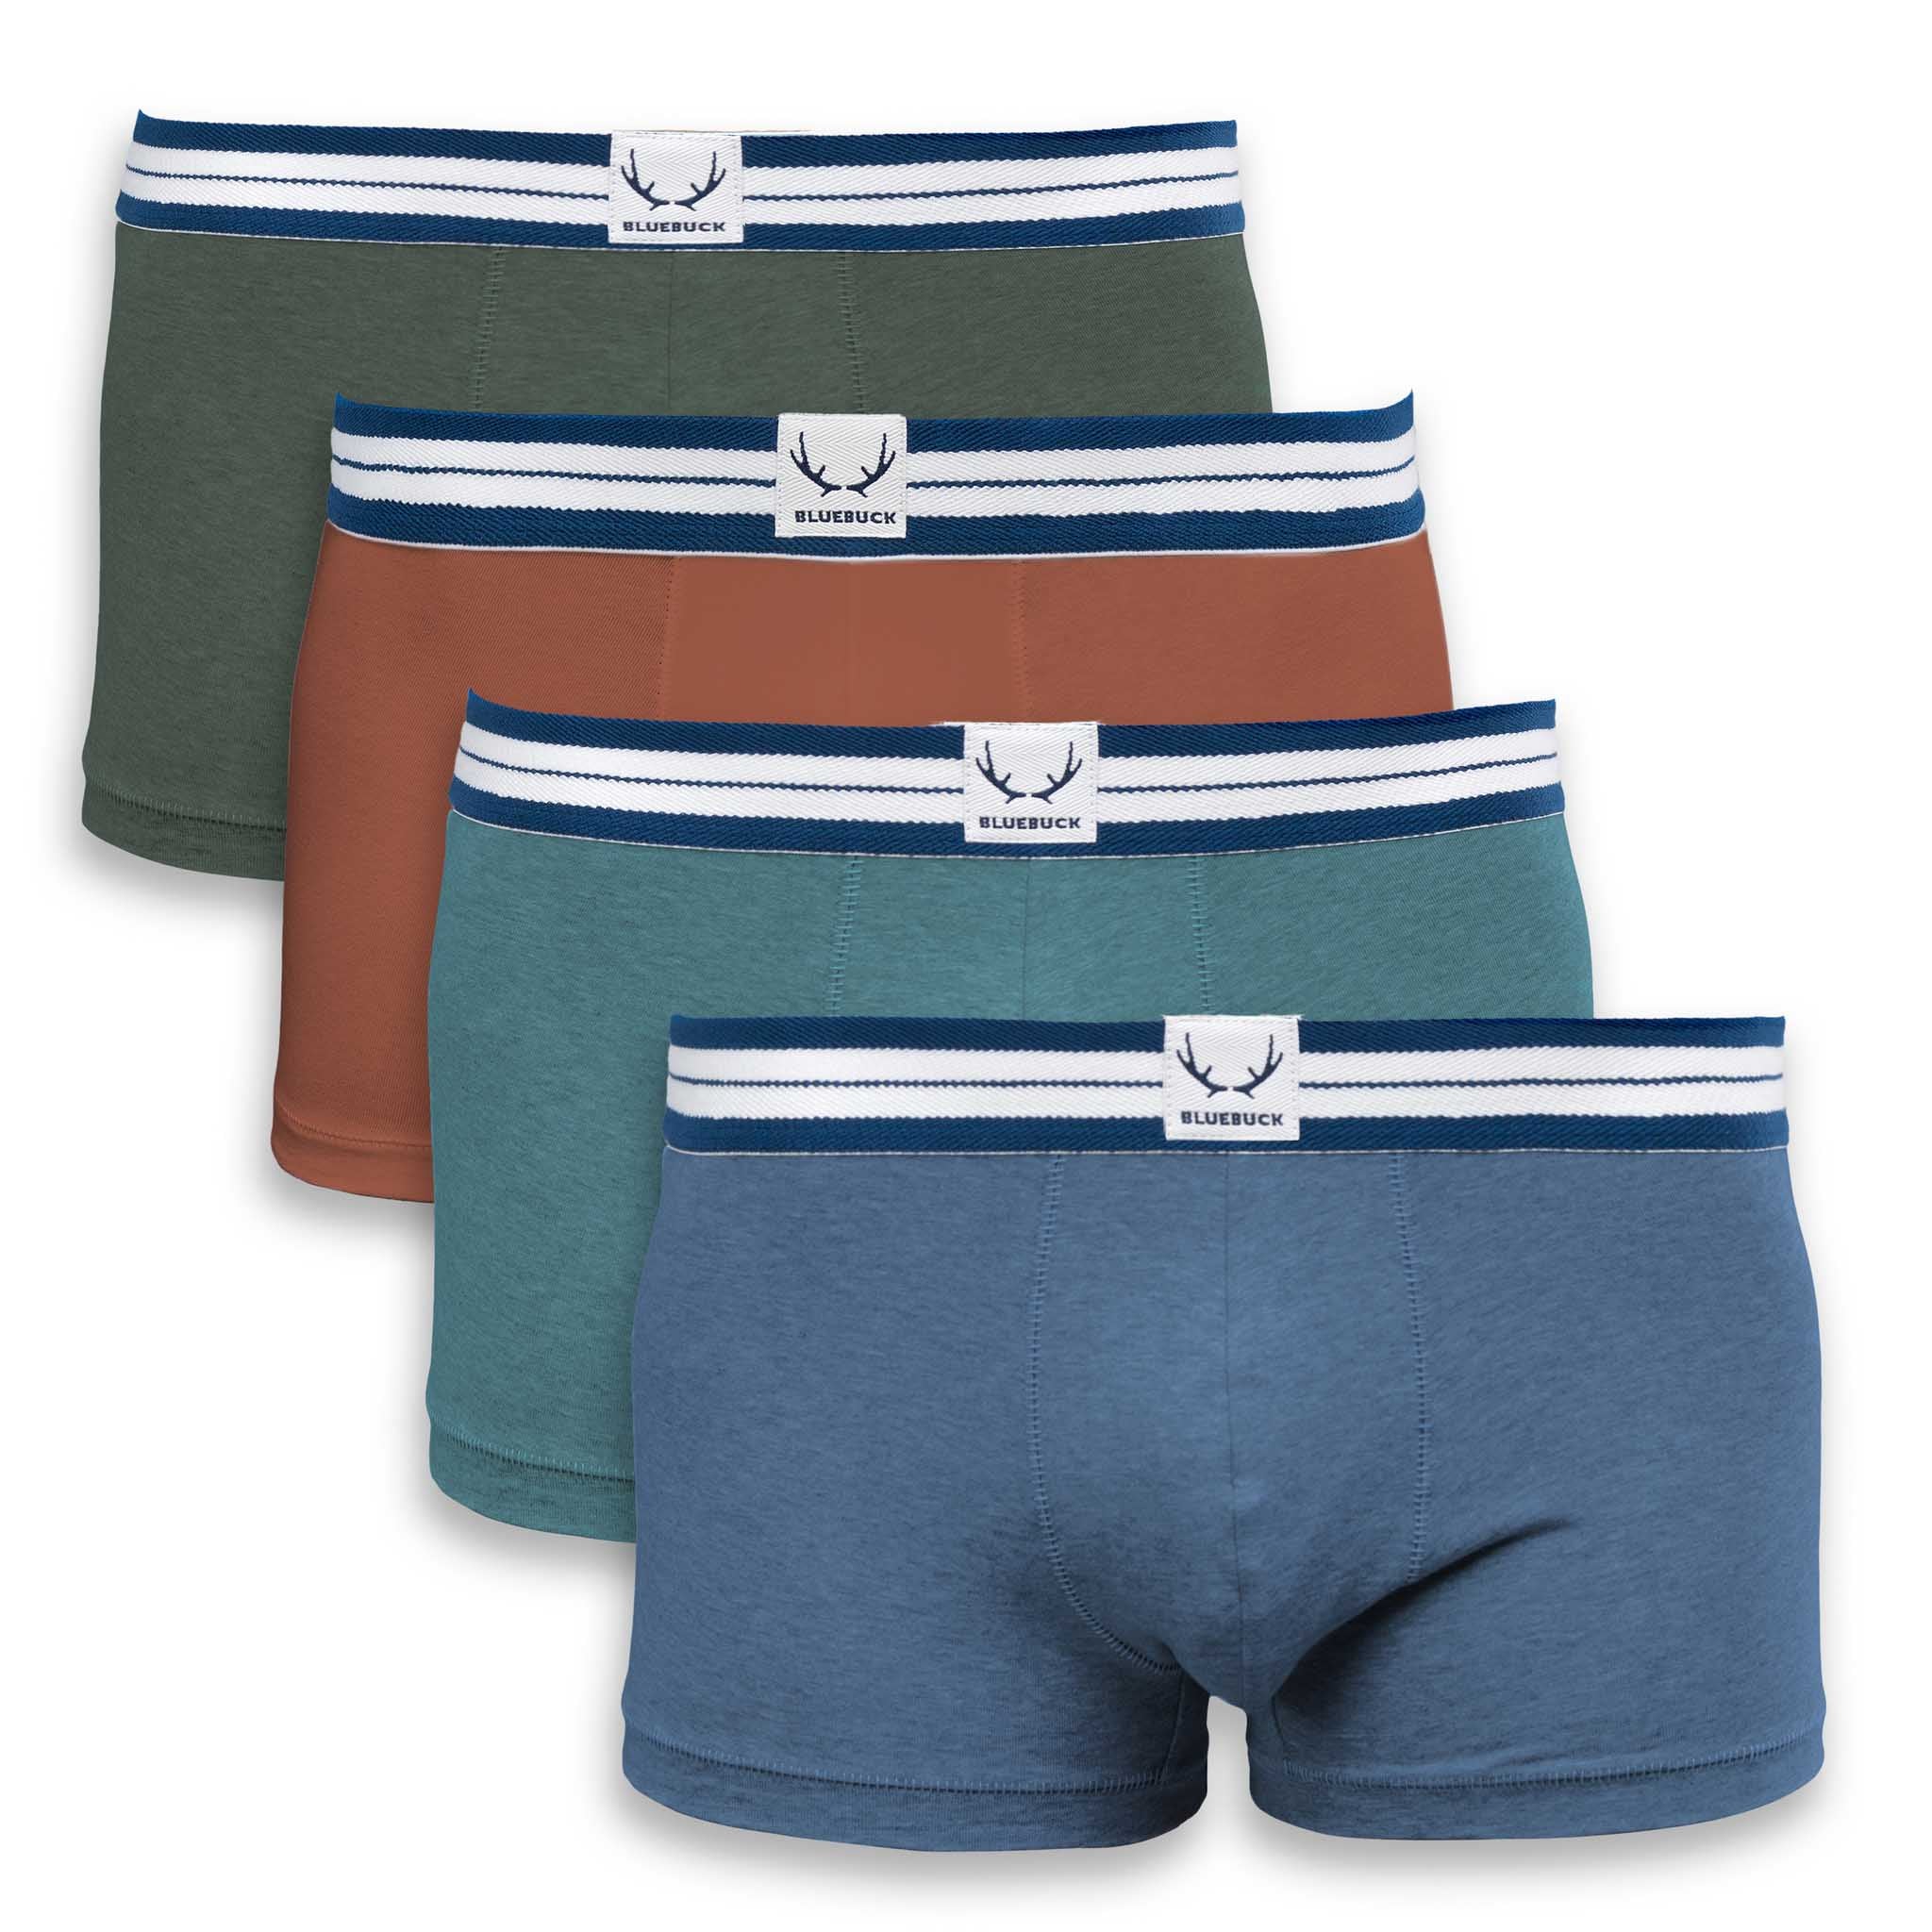 Classic boxer shorts 4-pack made of organic cotton from Bluebuck